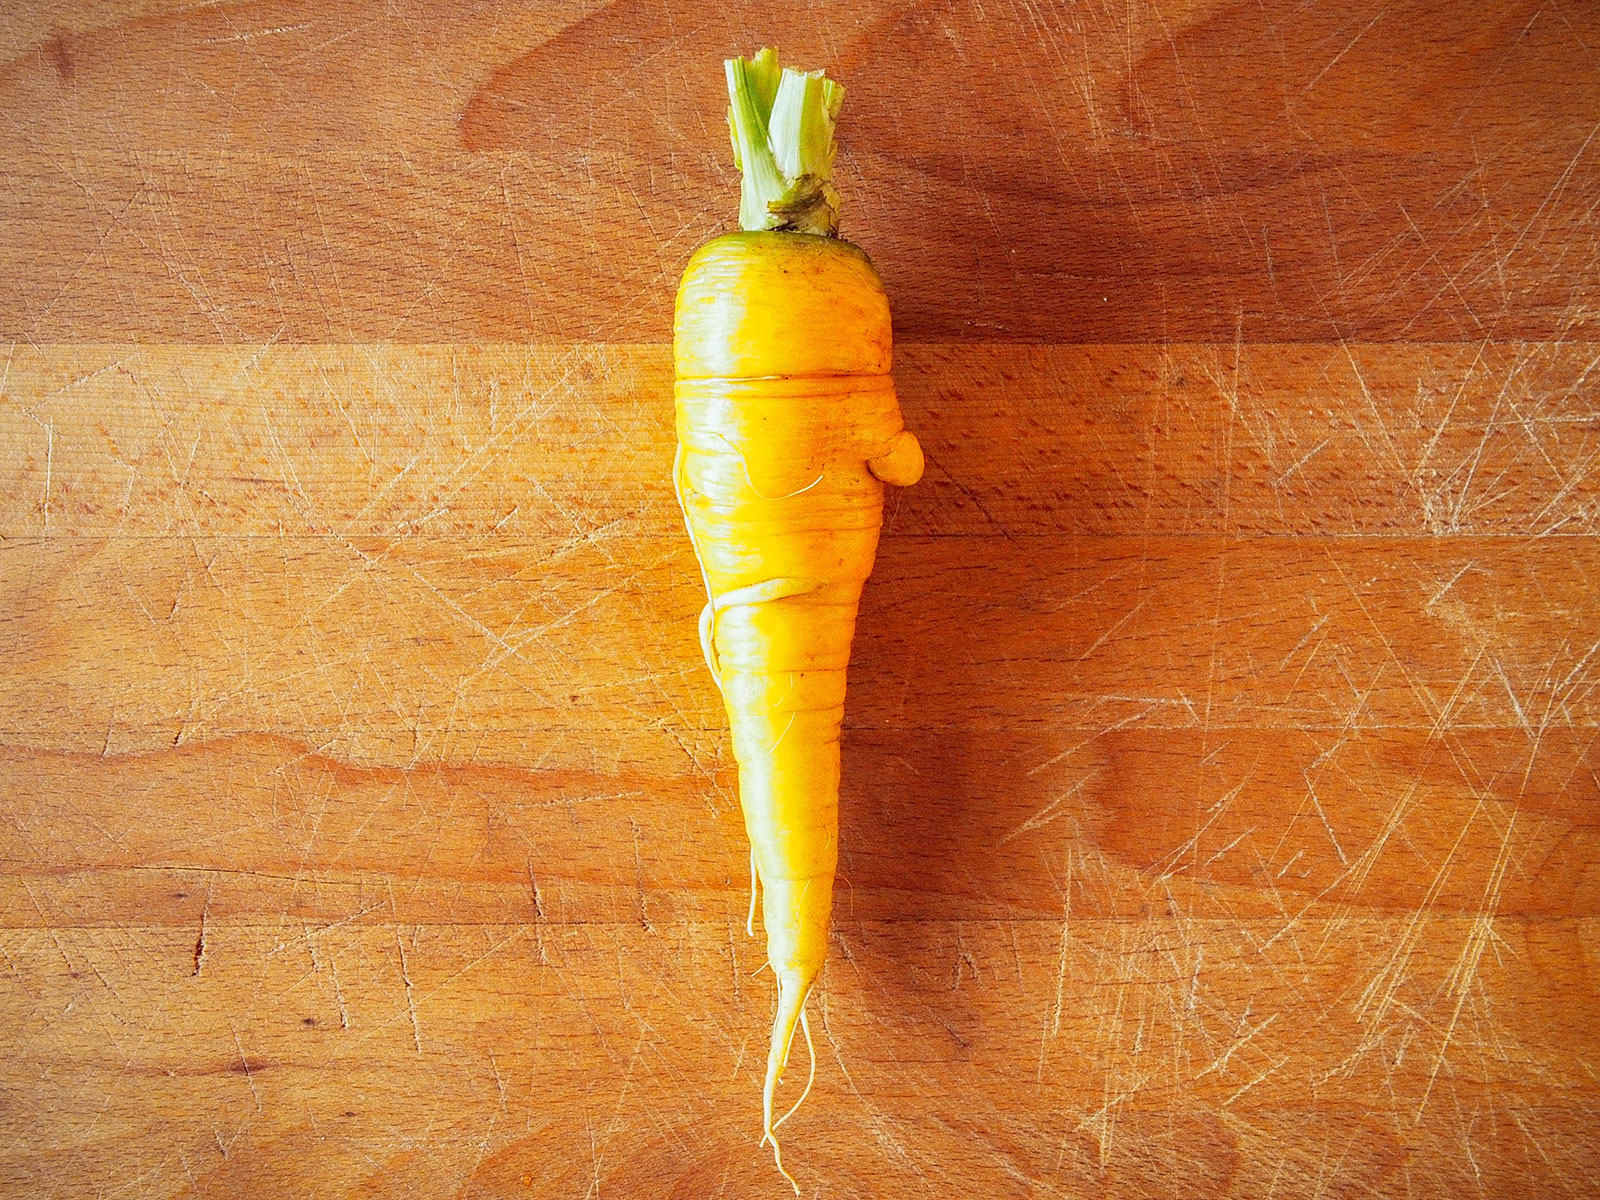 A yellow carrot on a wooden cutting board with a small bump on its skin